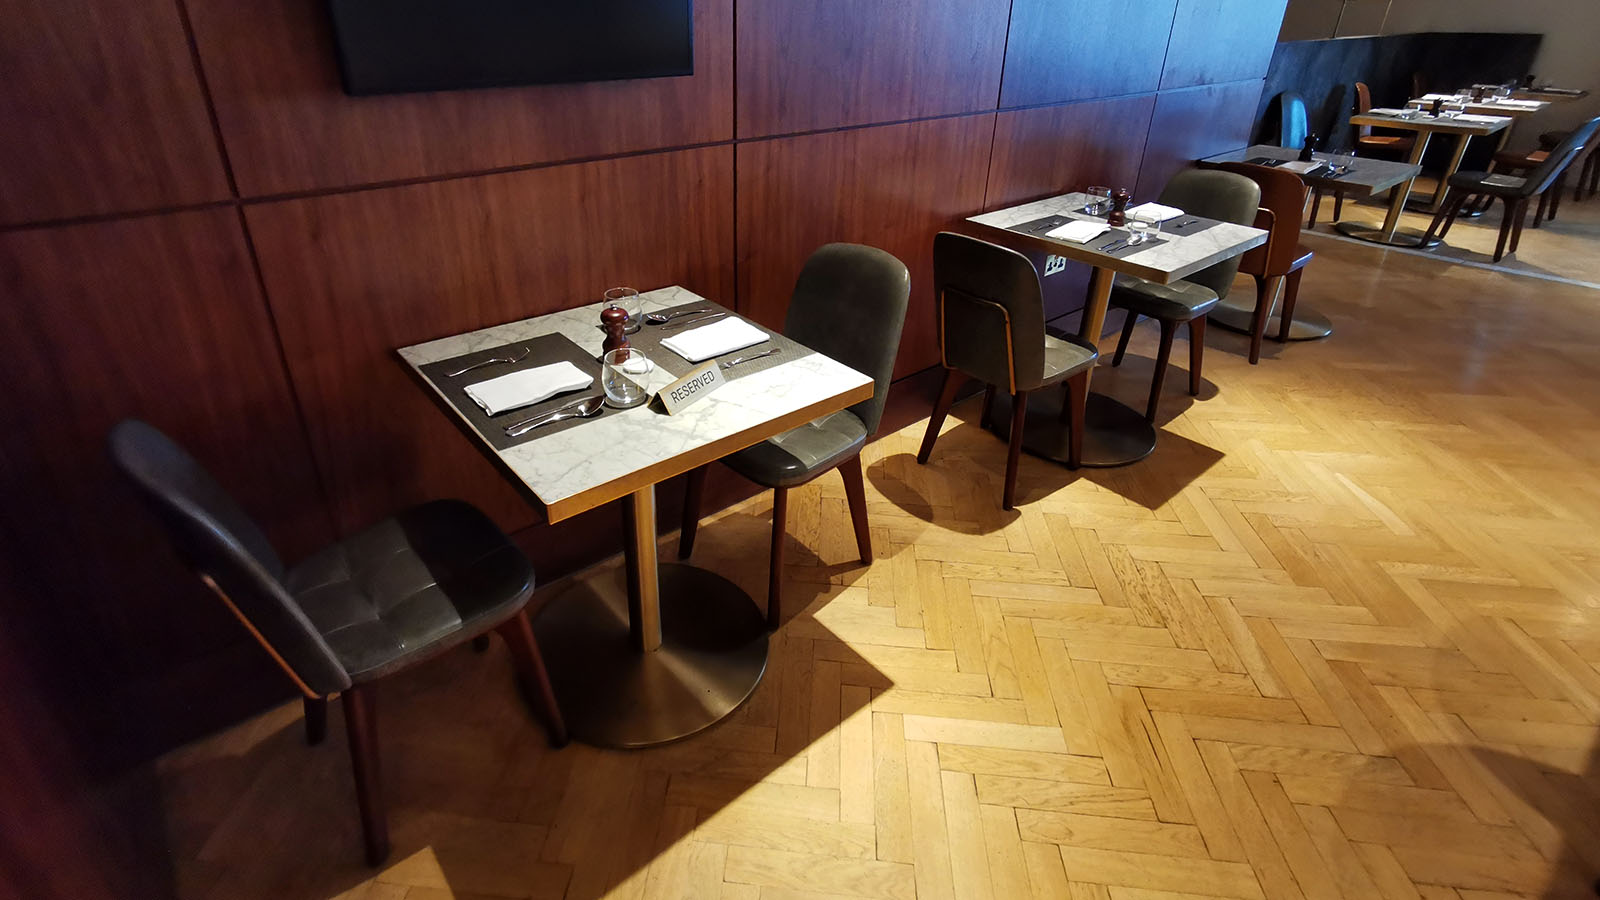 Set the table in The Qantas International London Lounge